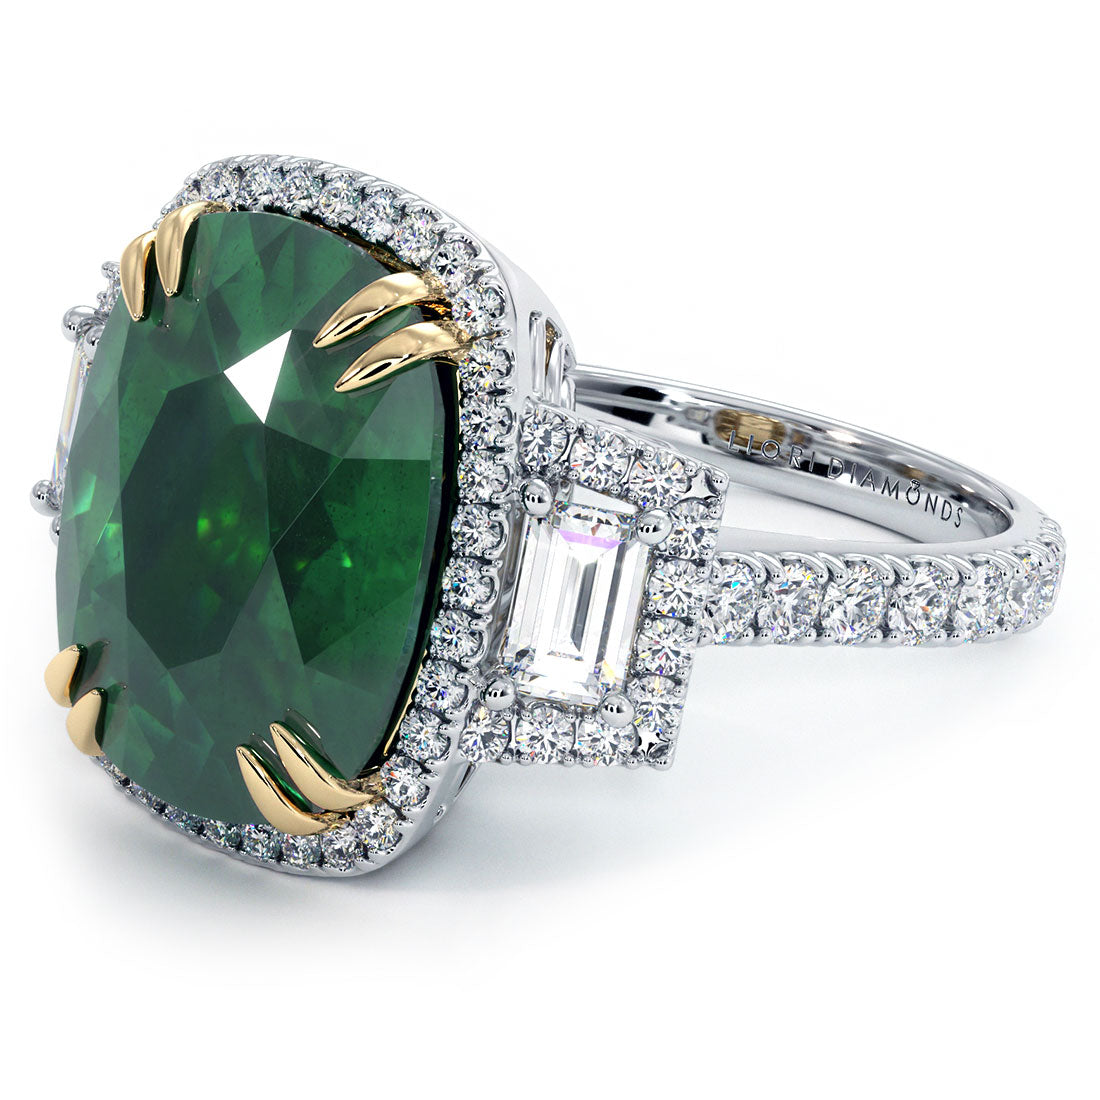 10.05 Carat Colombian Emerald & Diamond Cocktail Ring 18k White Gold